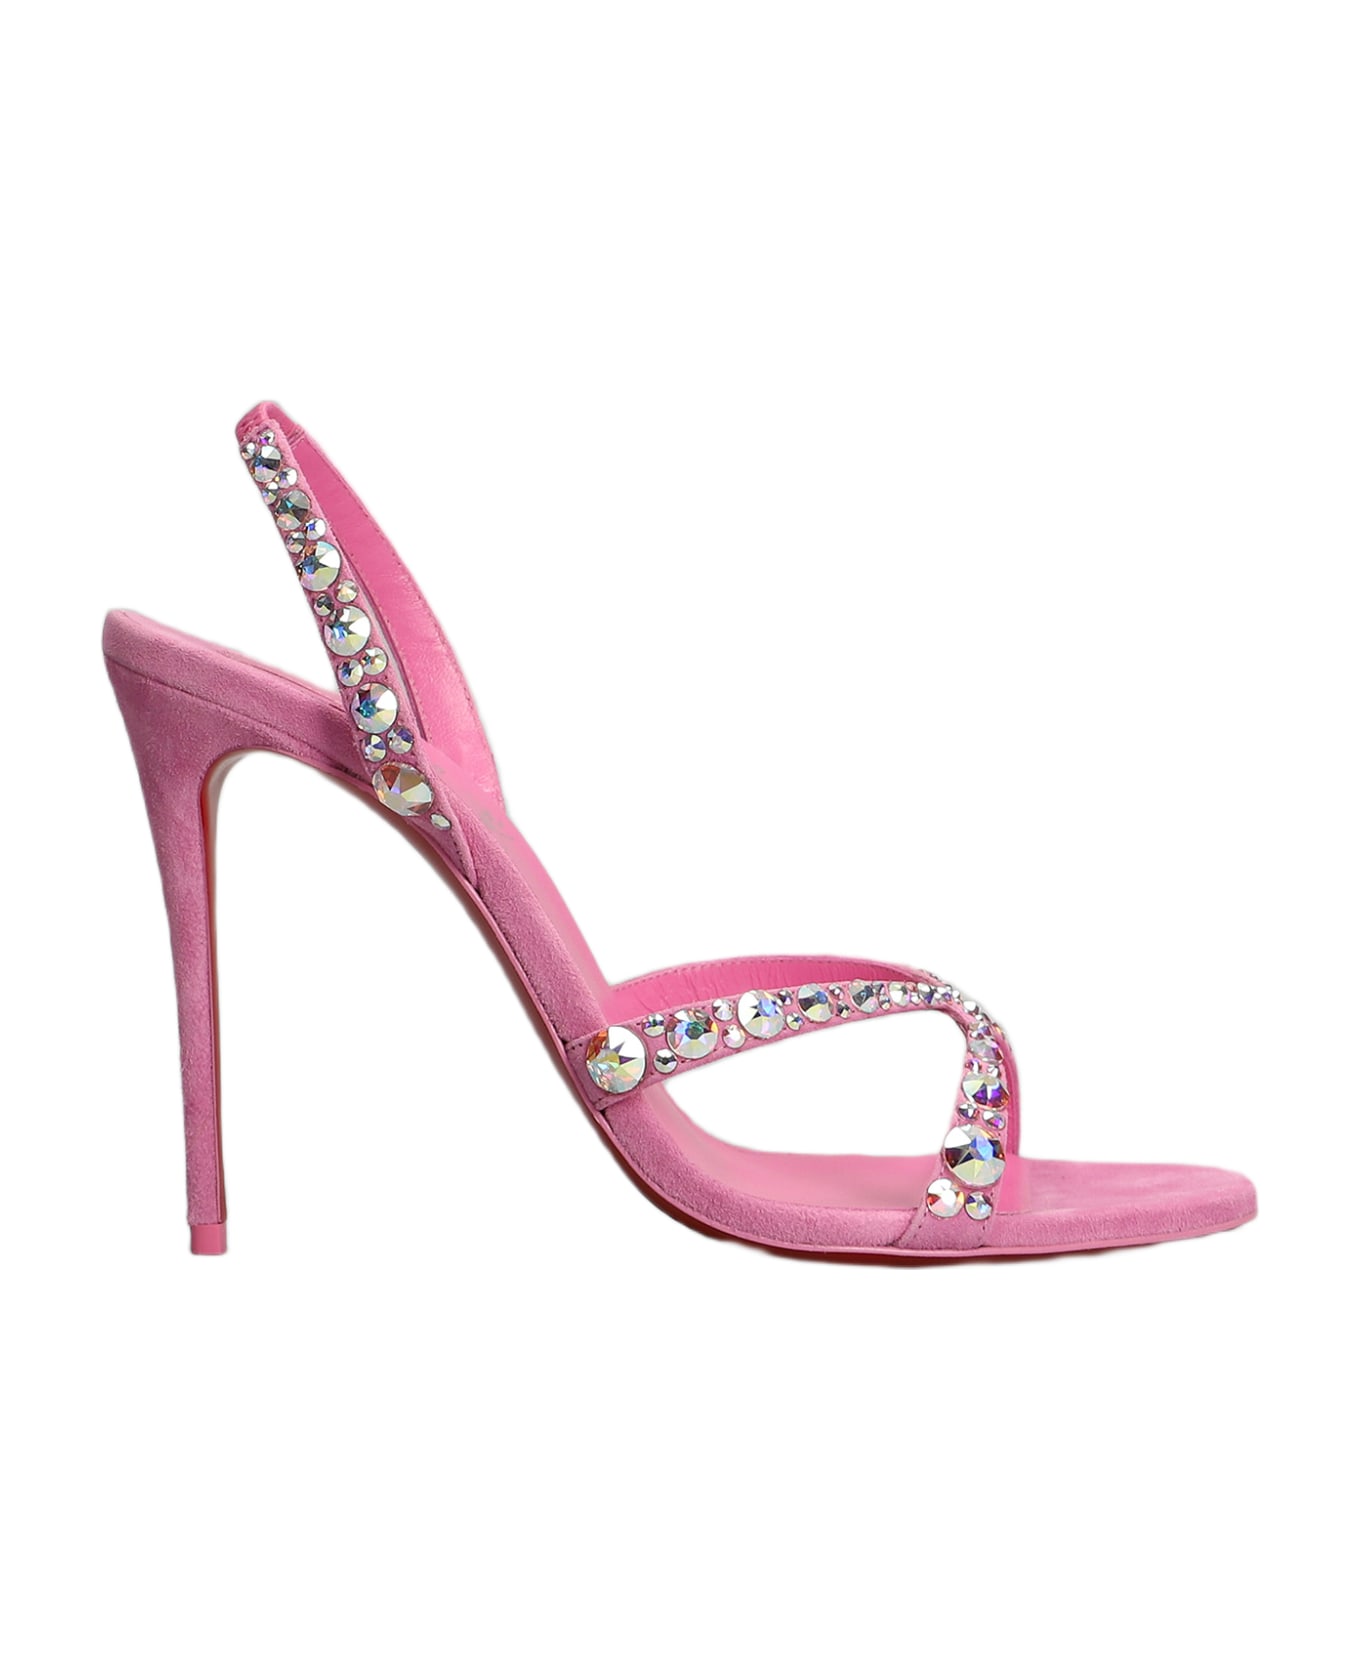 Christian Louboutin Emilie 100 Sandals In Rose-pink Suede | italist ...